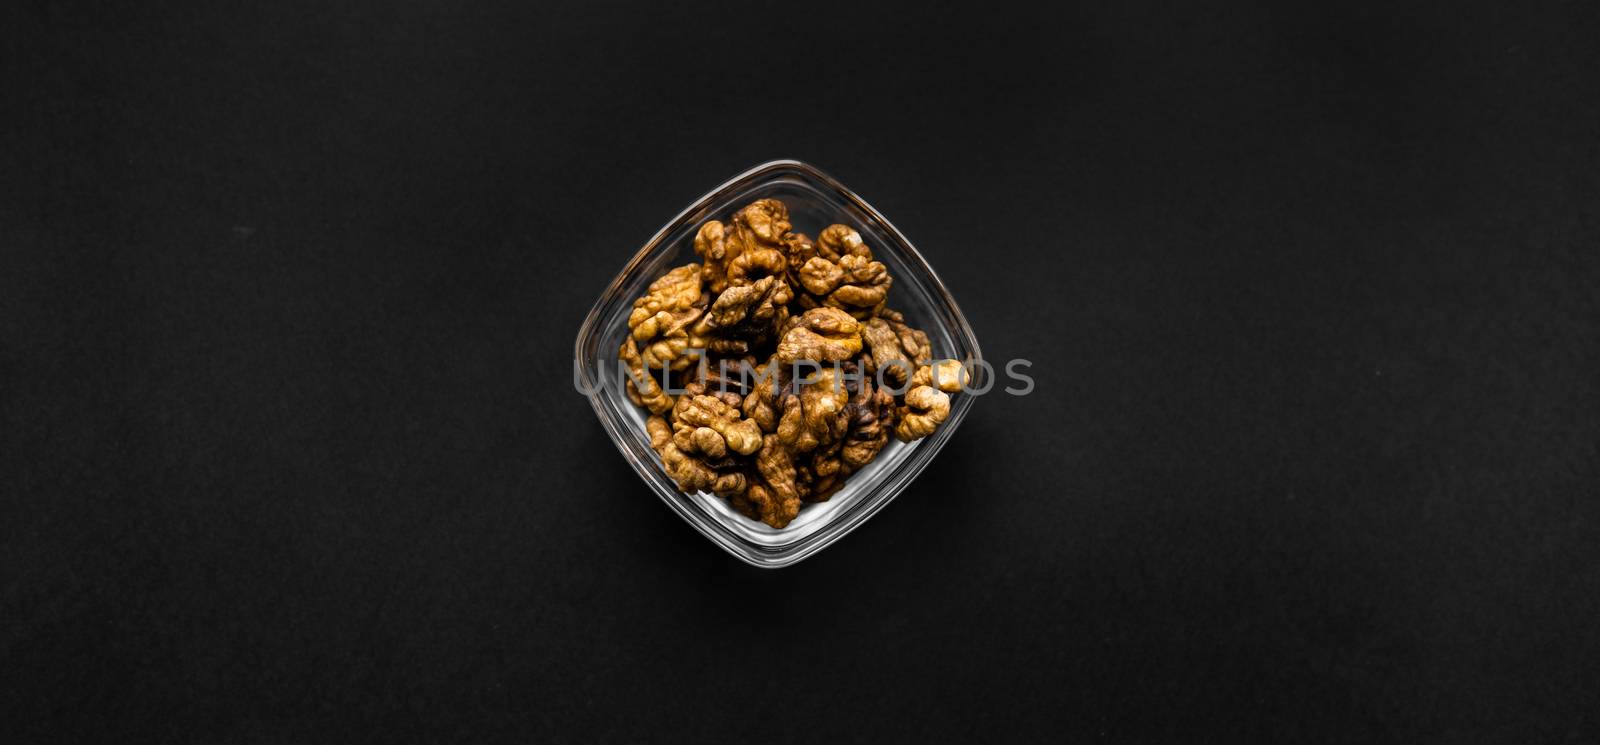 Walnut in a small plate on a black table. Walnuts is a healthy vegetarian protein nutritious food. Natural nuts snacks. by vovsht